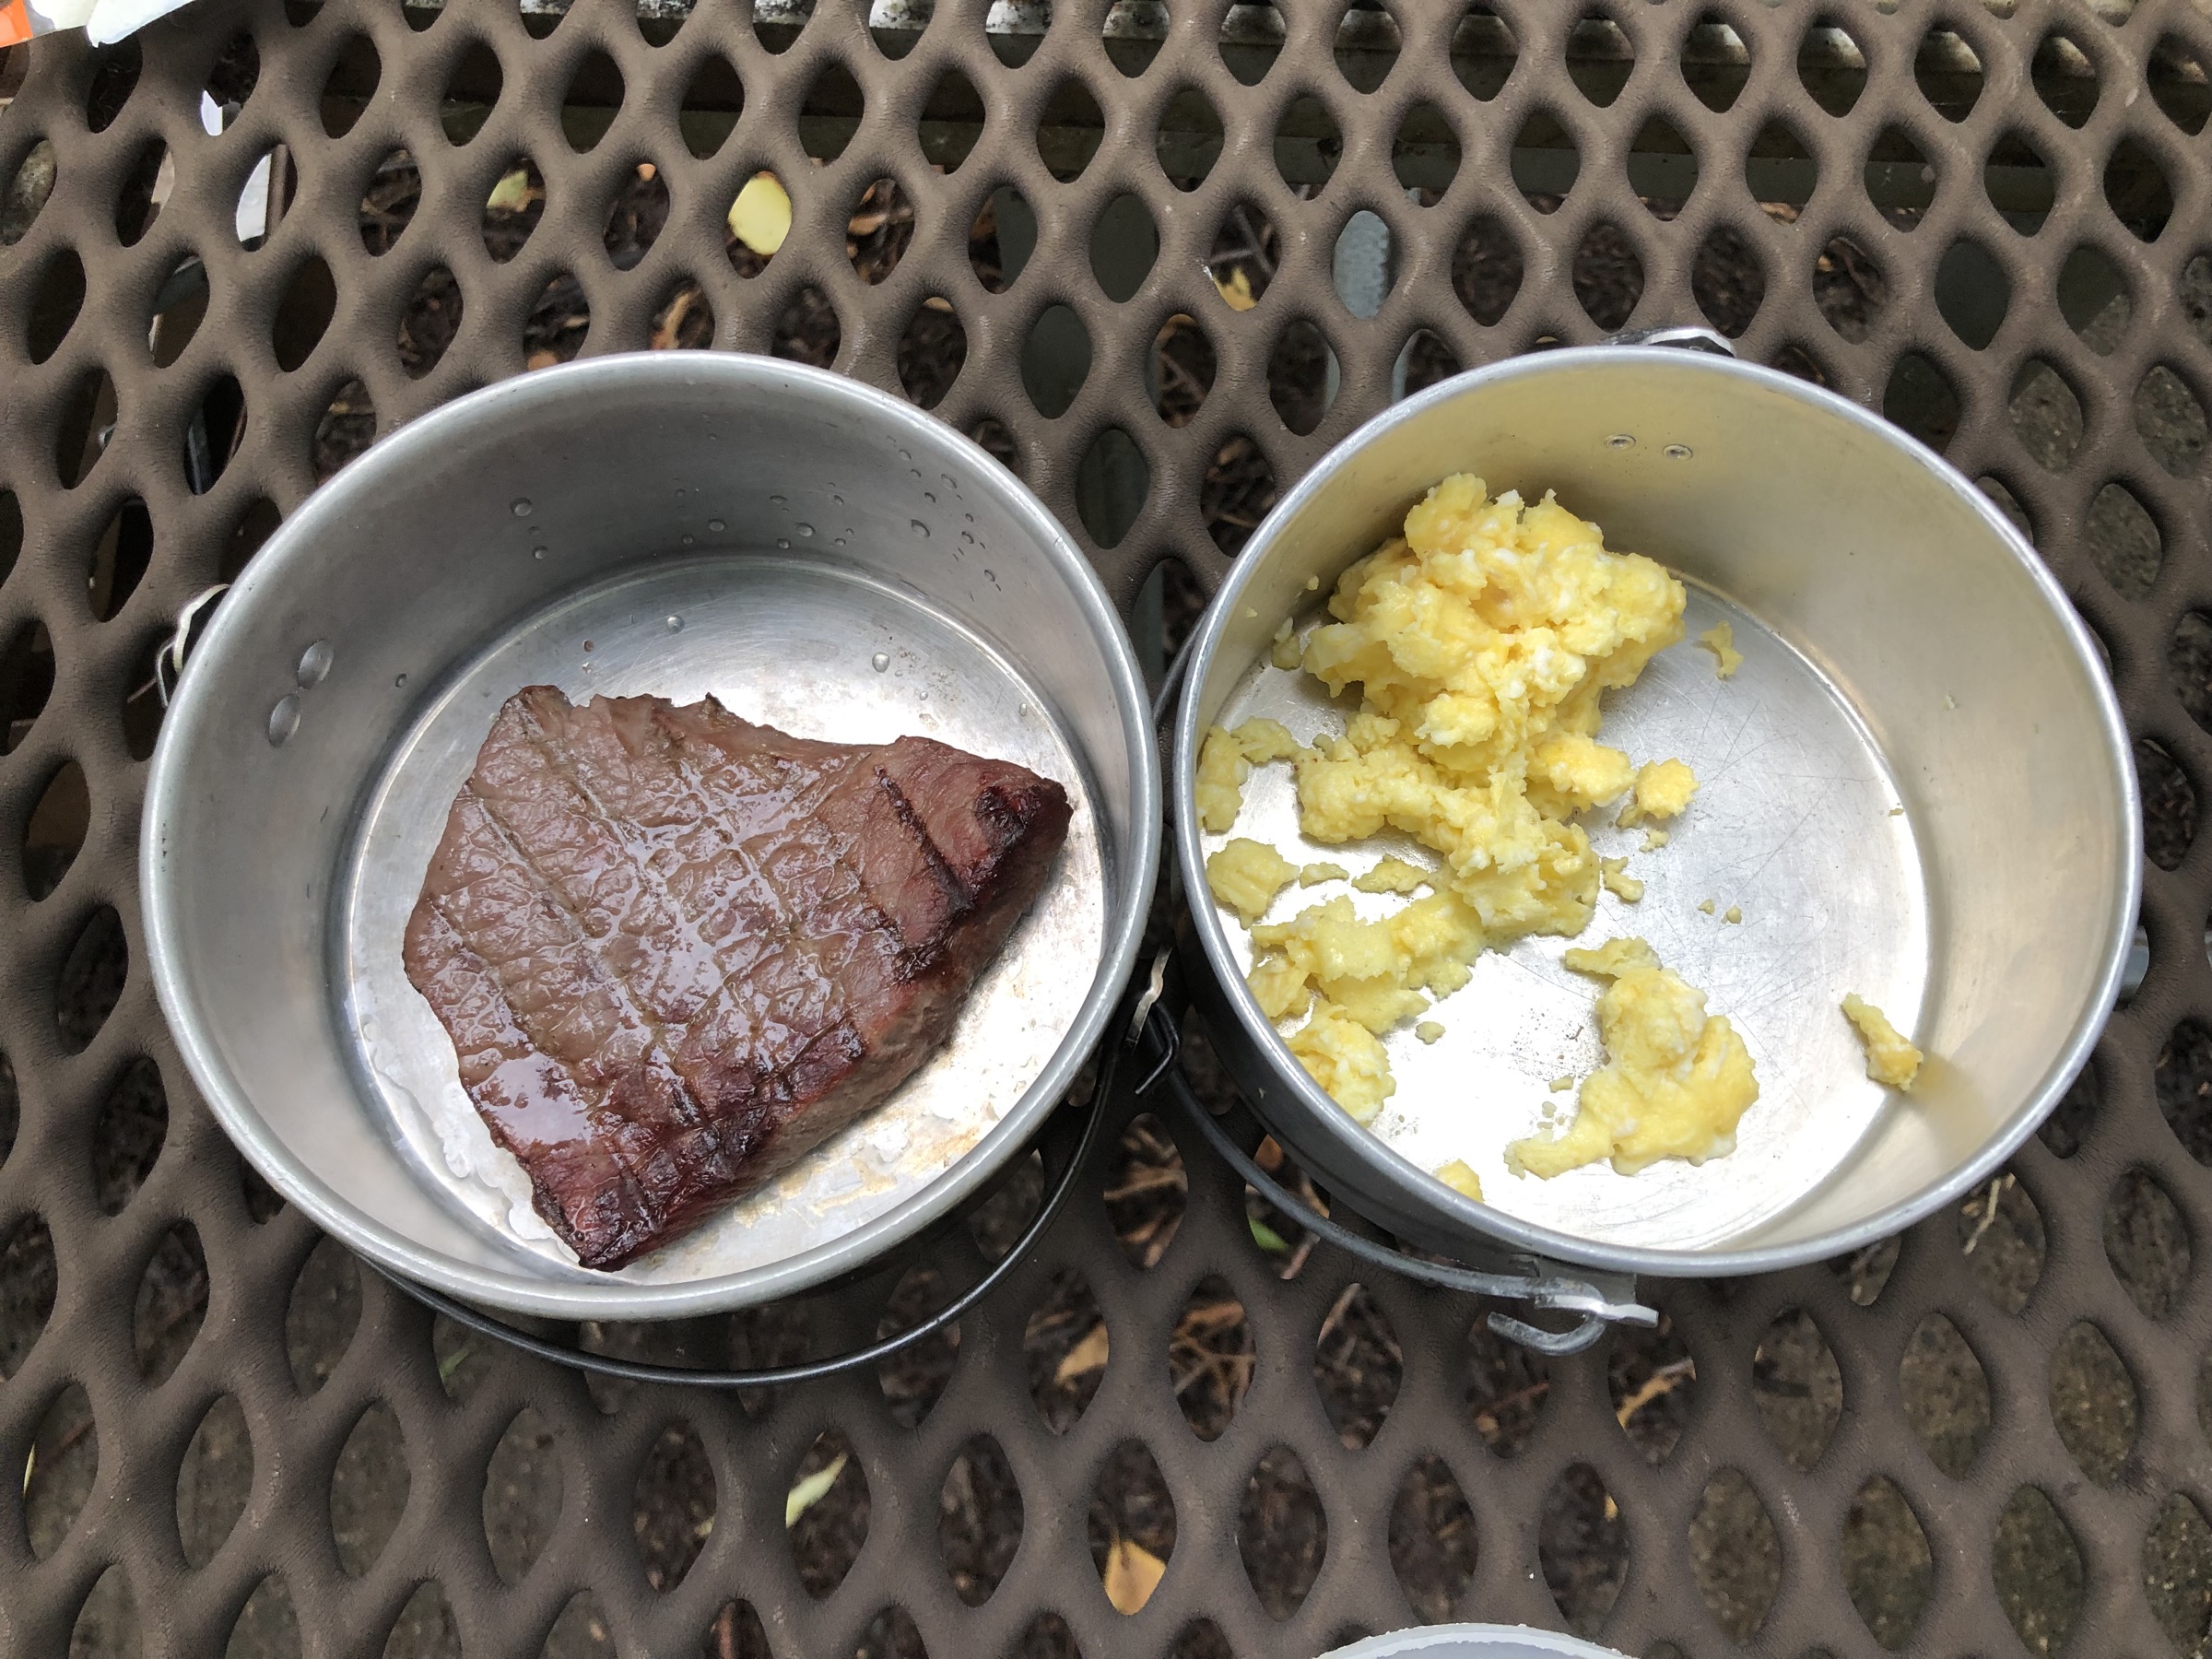 Two camping dishes, one with a small breakfast steak and one with partially eaten scrambled eggs